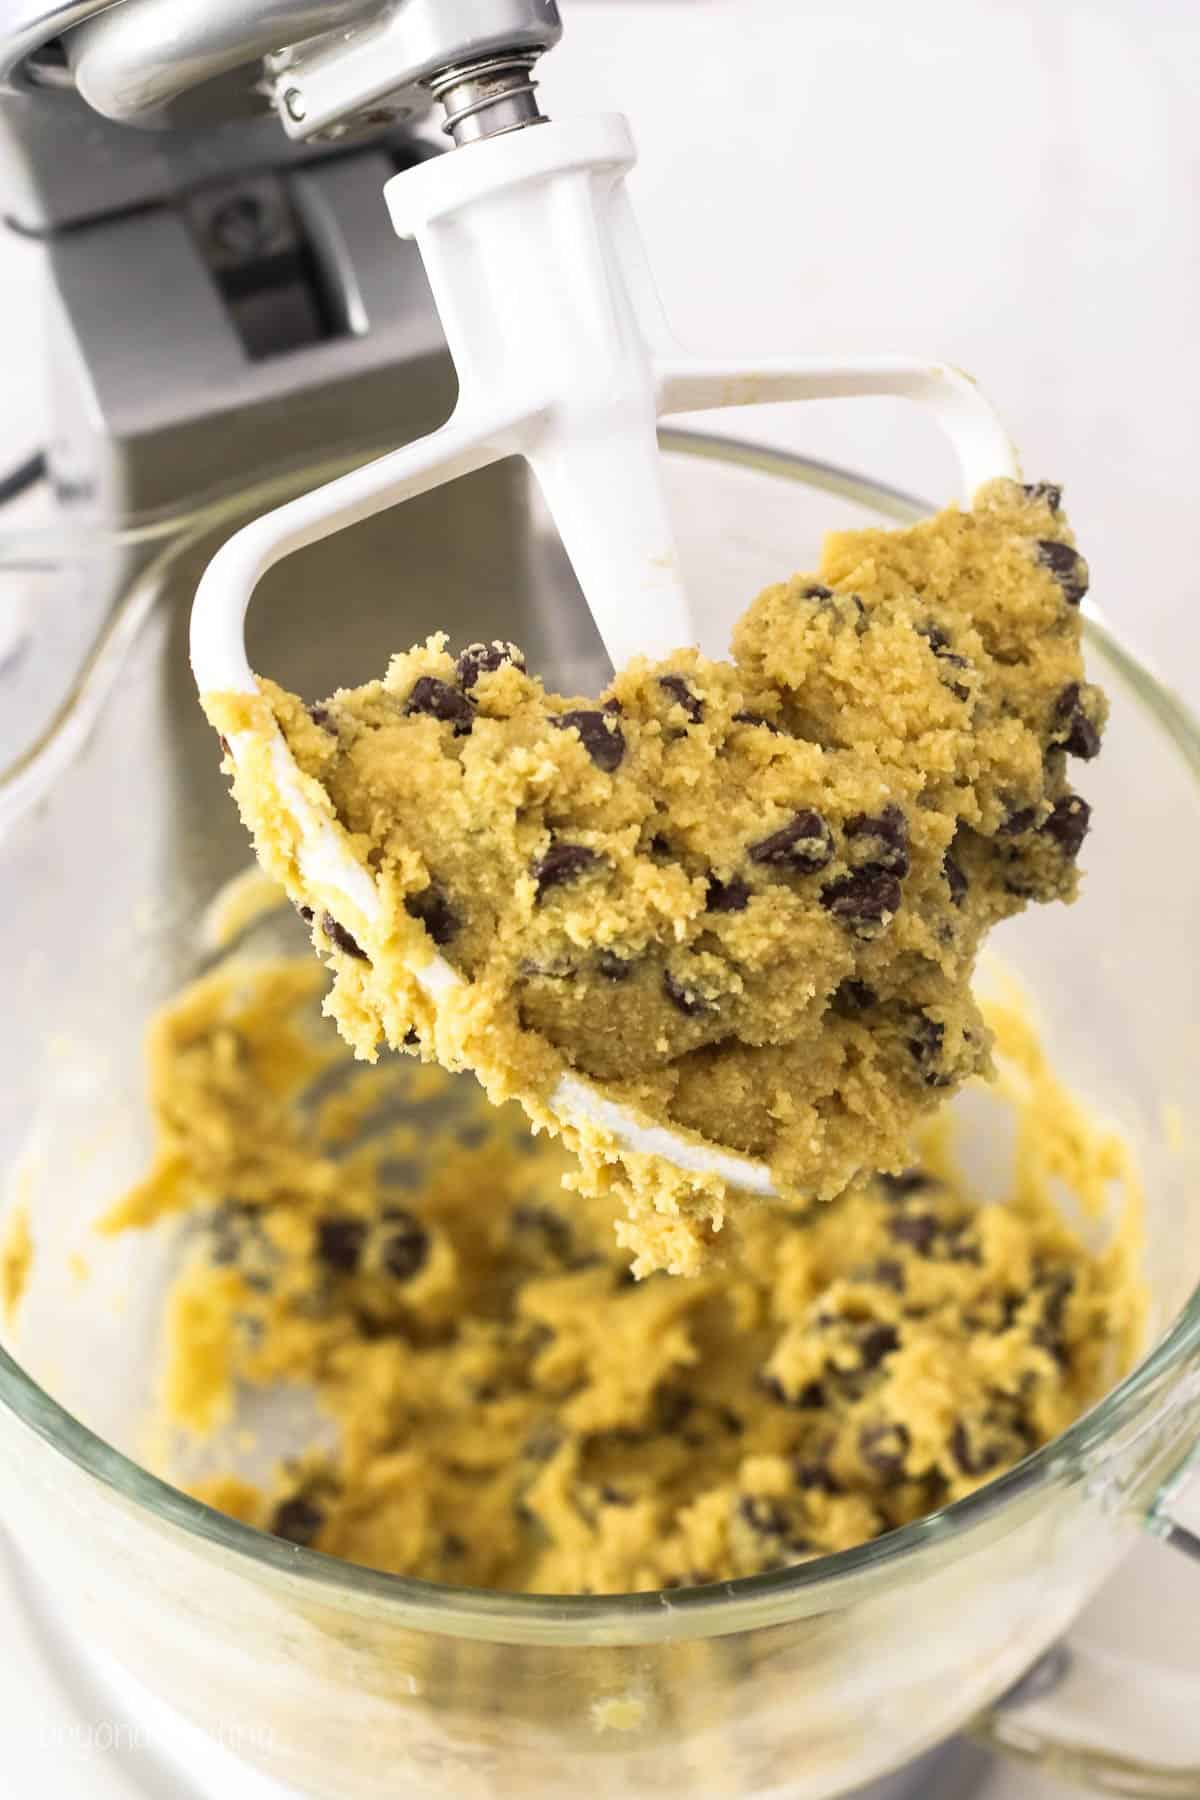 Chocolate chip cookie dough on a mixer